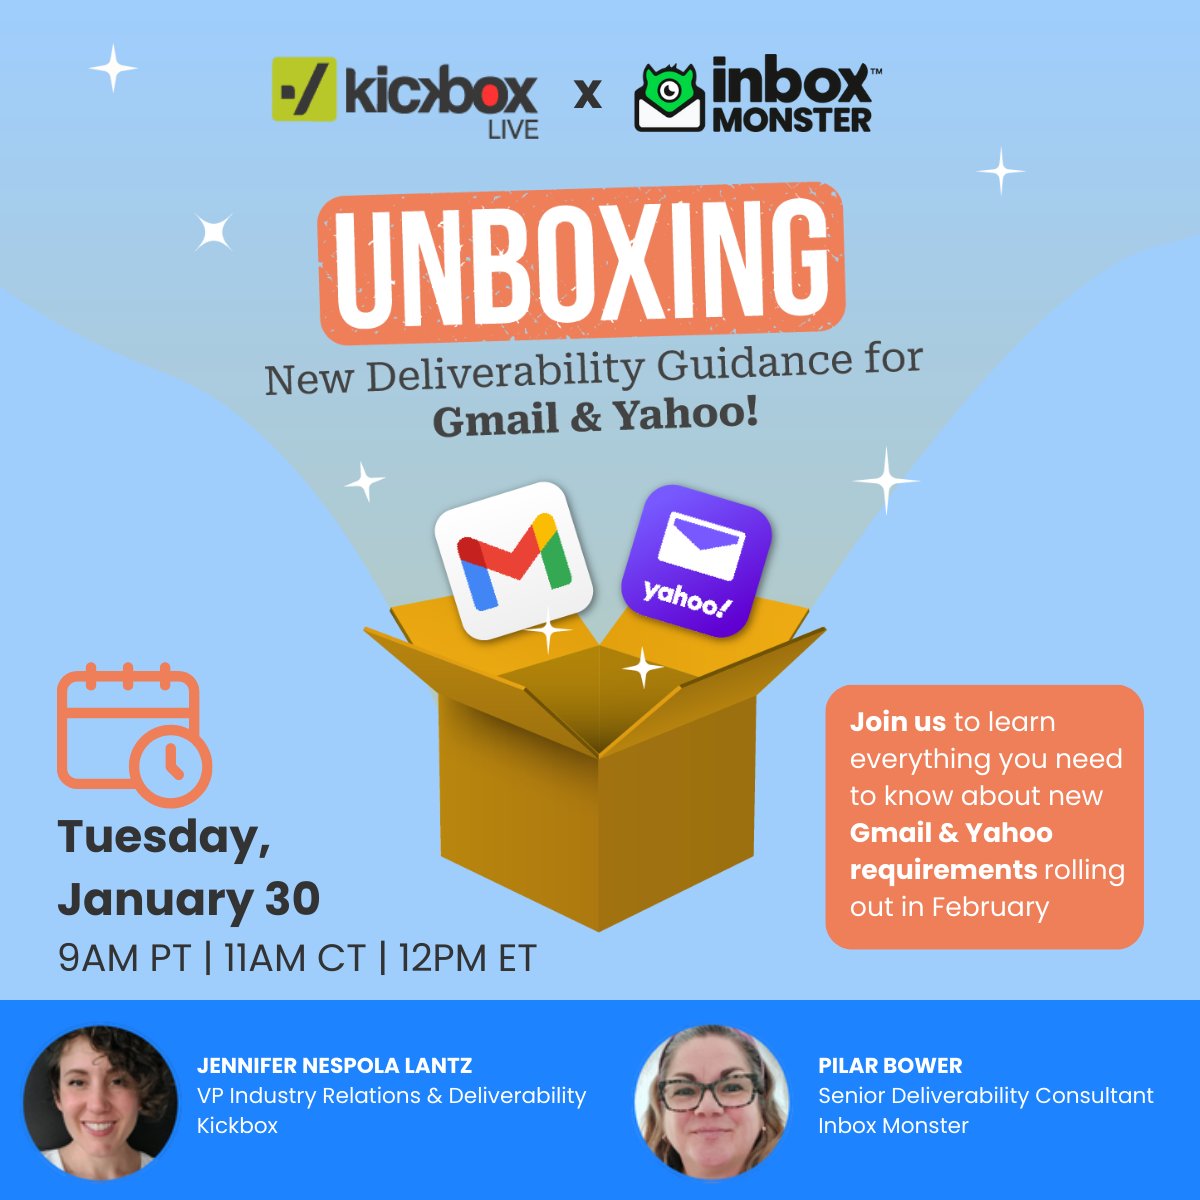 Are you ready for NEW #Gmail & #YahooMail requirements coming this February? Join our upcoming webinar (1/30) w/ #deliverability experts @emailDELIVbyJEN from Kickbox & Pilar Bower from @inboxmonsters to learn everything you need to know. Save your spot: ow.ly/9ChN50QuEYo